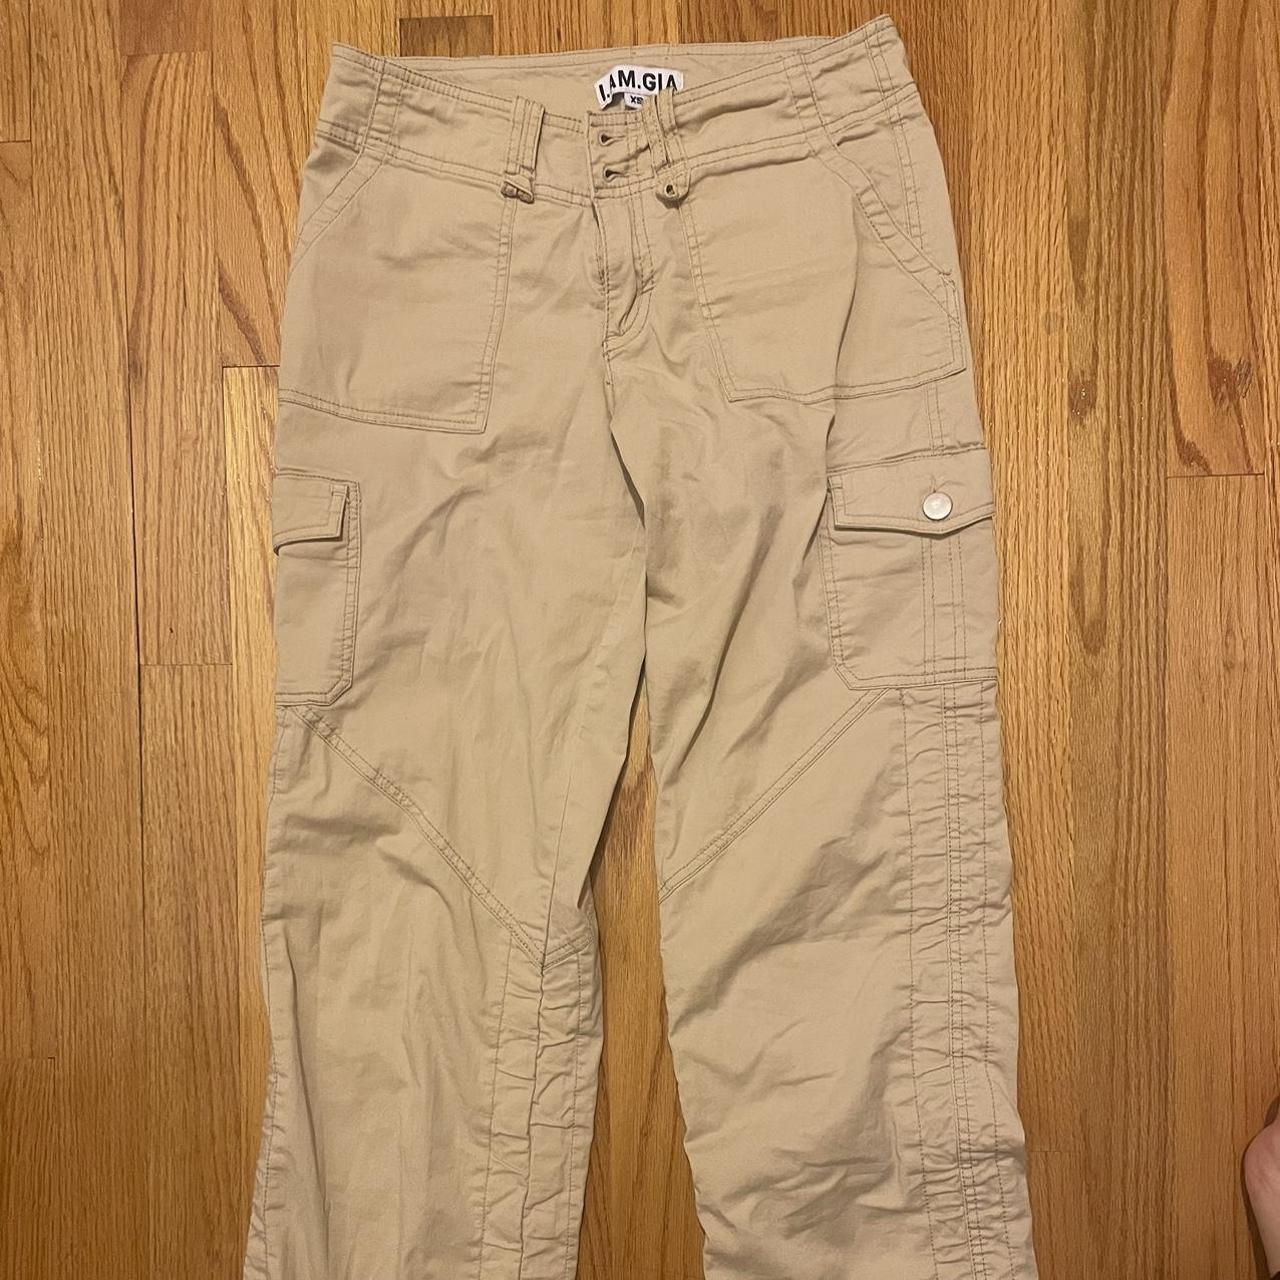 I.AM.GIA Ryder Cargo Pants. Size XS. Sold out online... - Depop